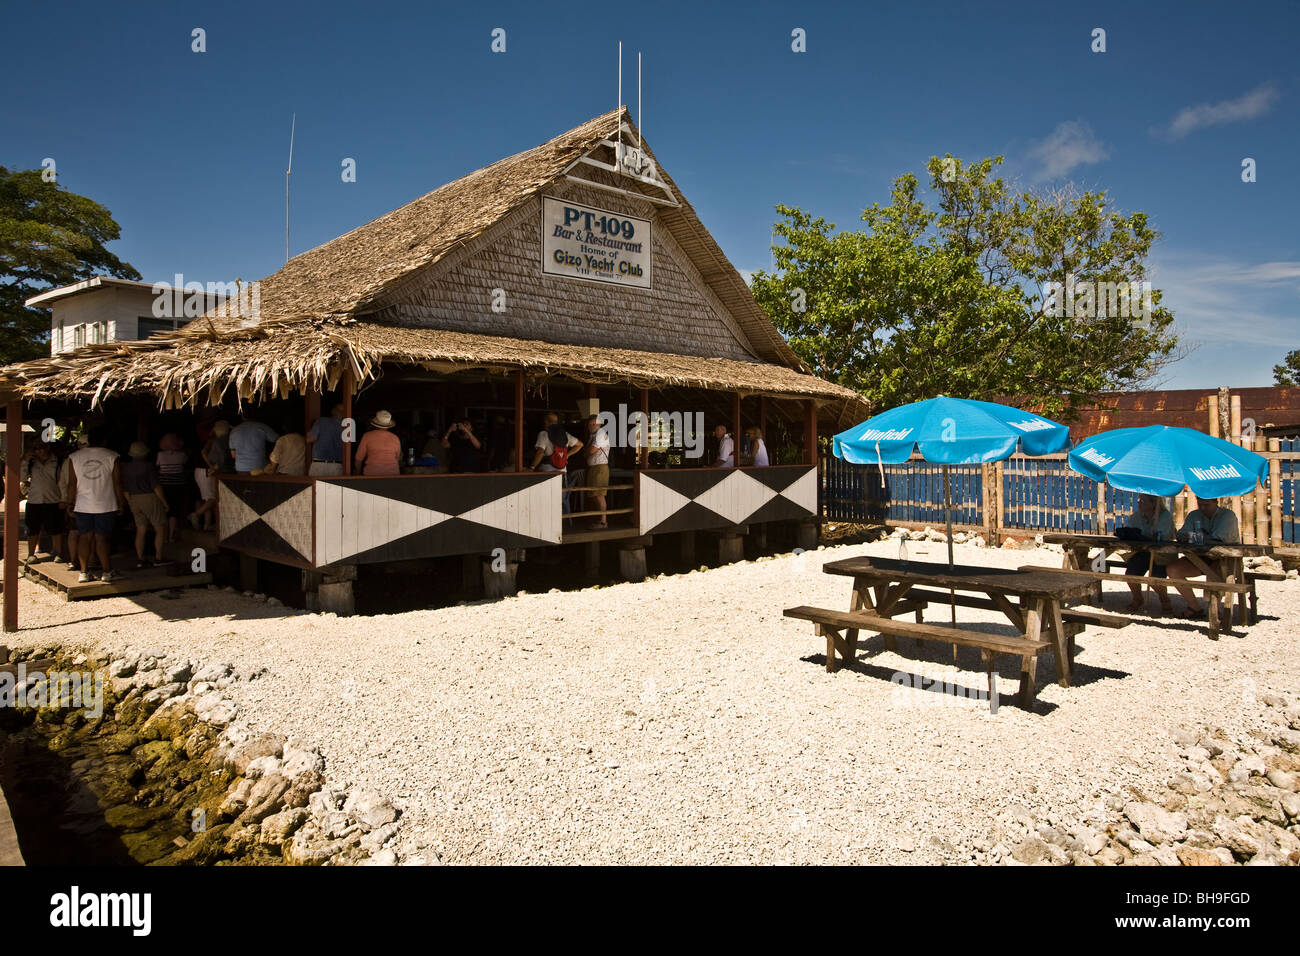 The PT-109 Bar & Restaurant is a Gizo landmark and one of the legendary watering holes of the South Pacific Stock Photo